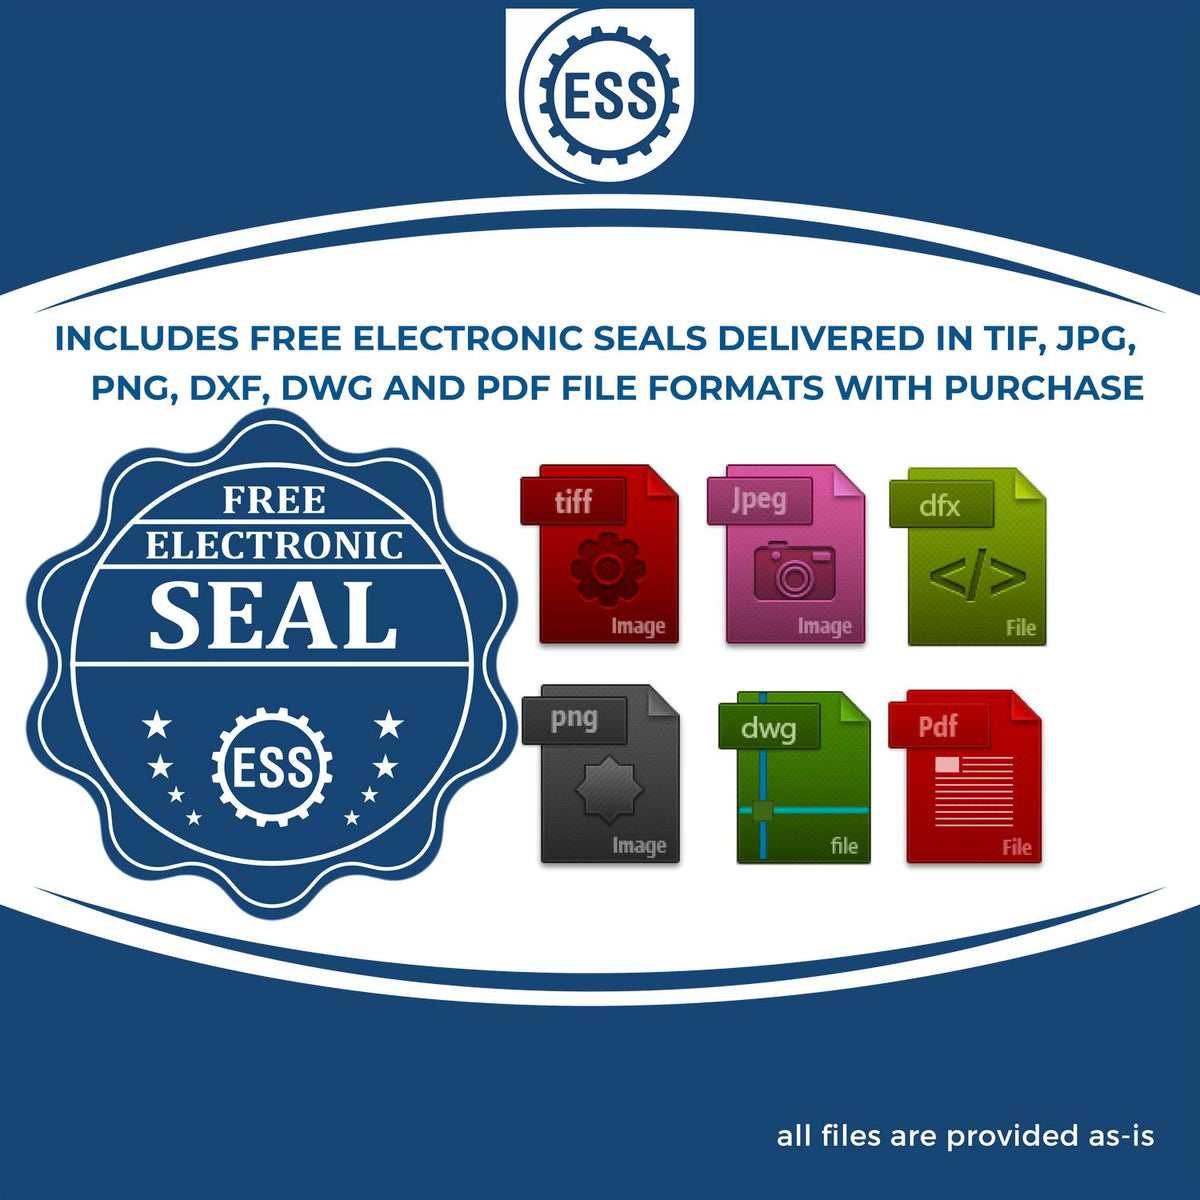 An infographic for the free electronic seal for the Heavy Duty Cast Iron Virginia Engineer Seal Embosser illustrating the different file type icons such as DXF, DWG, TIF, JPG and PNG.